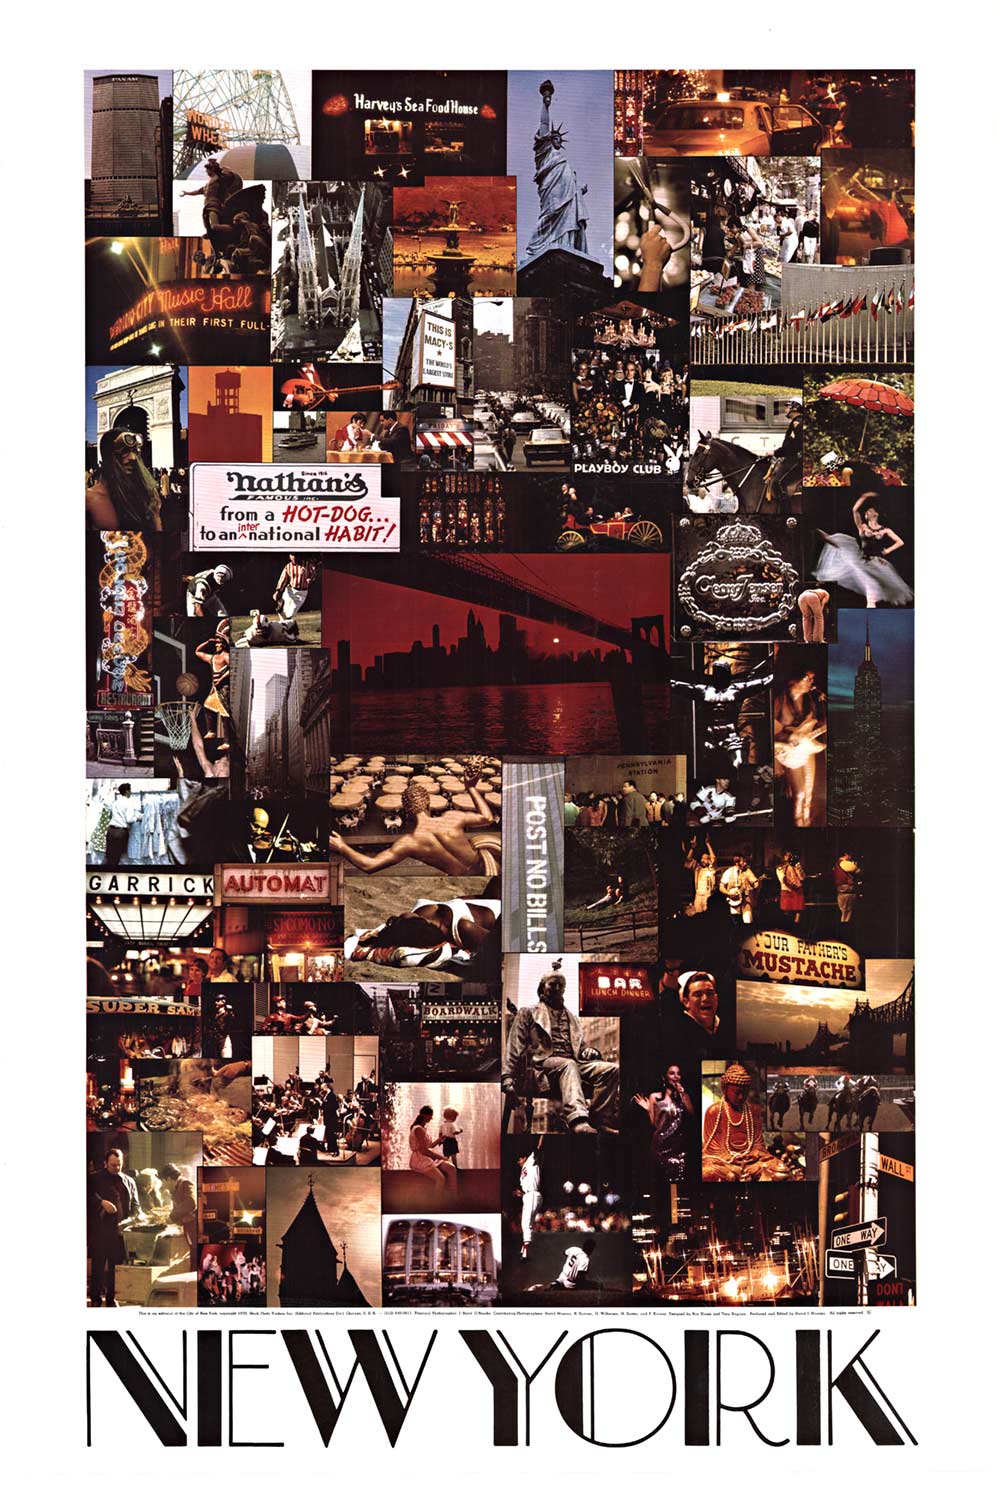 Original "New York" 1970 vintage poster. Linen backed in excellent condition, ready to frame. Very clean. Artist: David J. <br> <br>This is a vintage 1970 lithograph poster featuring a montage of New York. A portion of the text along the bottom re